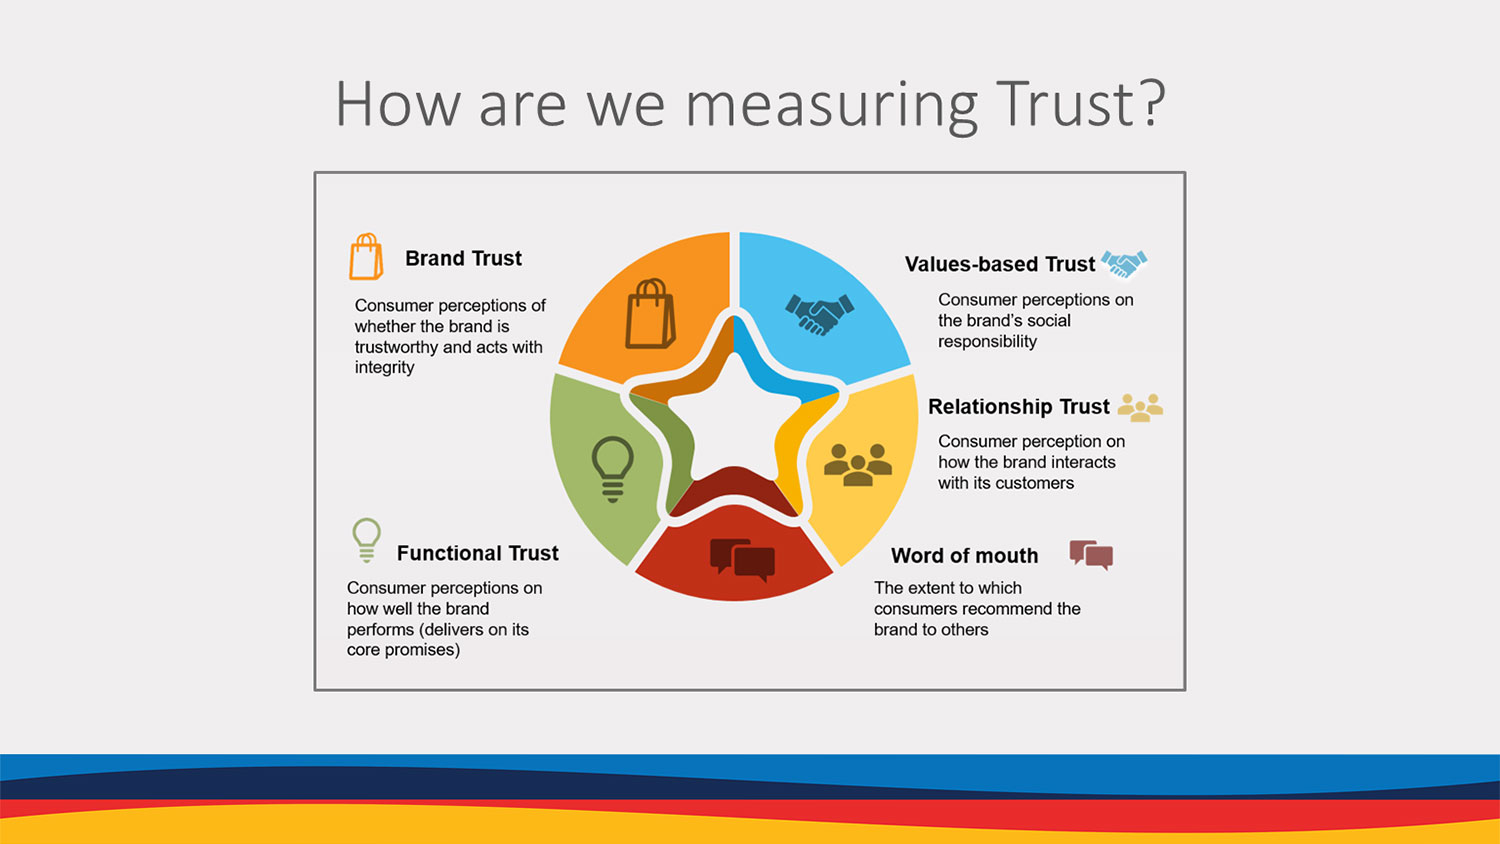 How are we measuring trust?